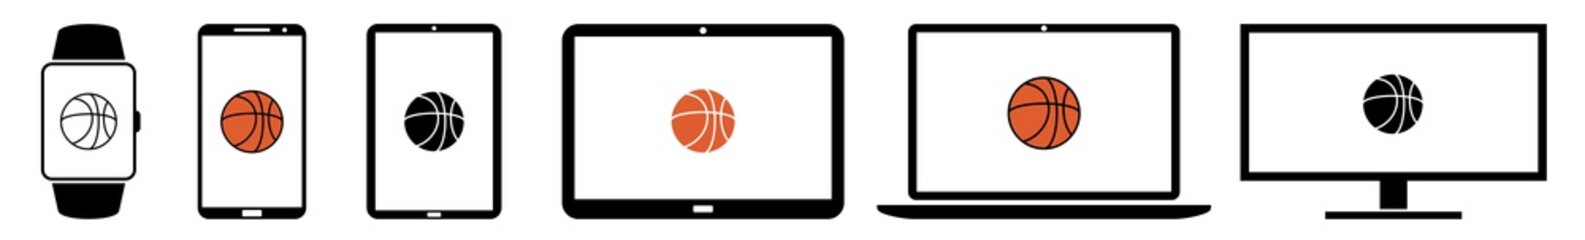 Display Basketball Basket Ball Icon Devices Set | Web Screen Game Play League Division Device Online | Laptop Vector Illustration | Mobile Phone | PC Computer Smartphone Tablet Sign Isolated